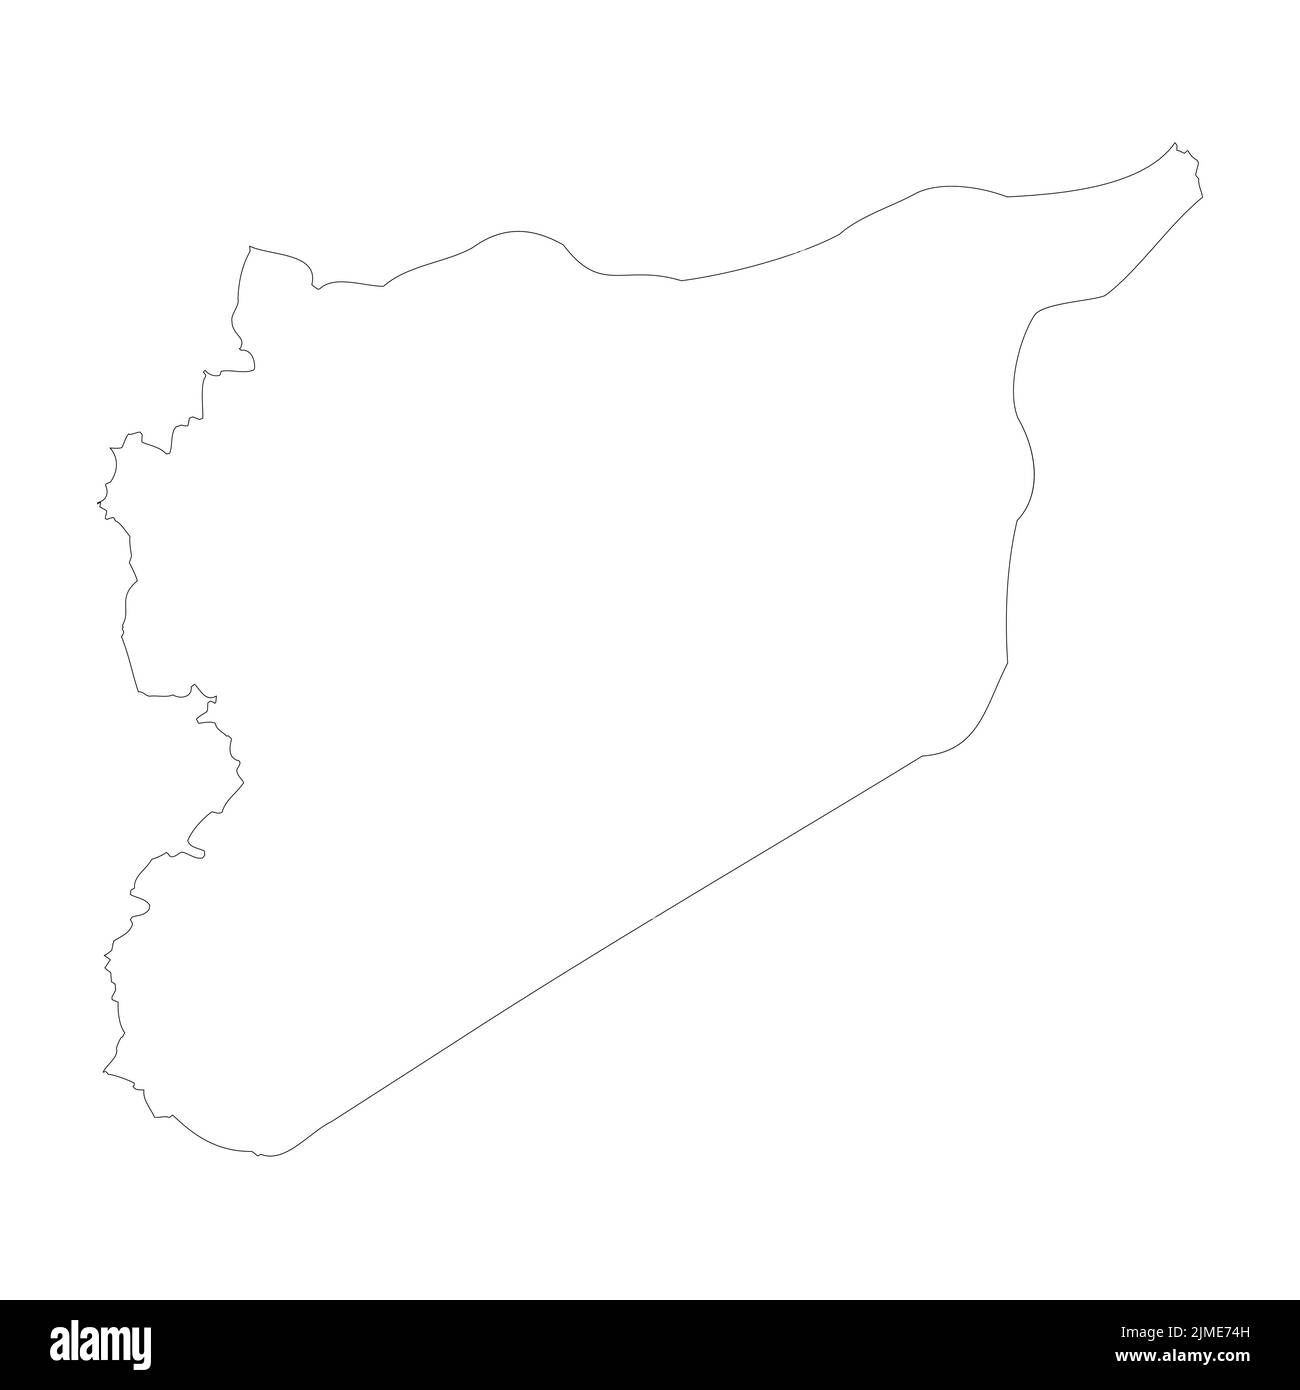 Syria vector country map outline Stock Vector